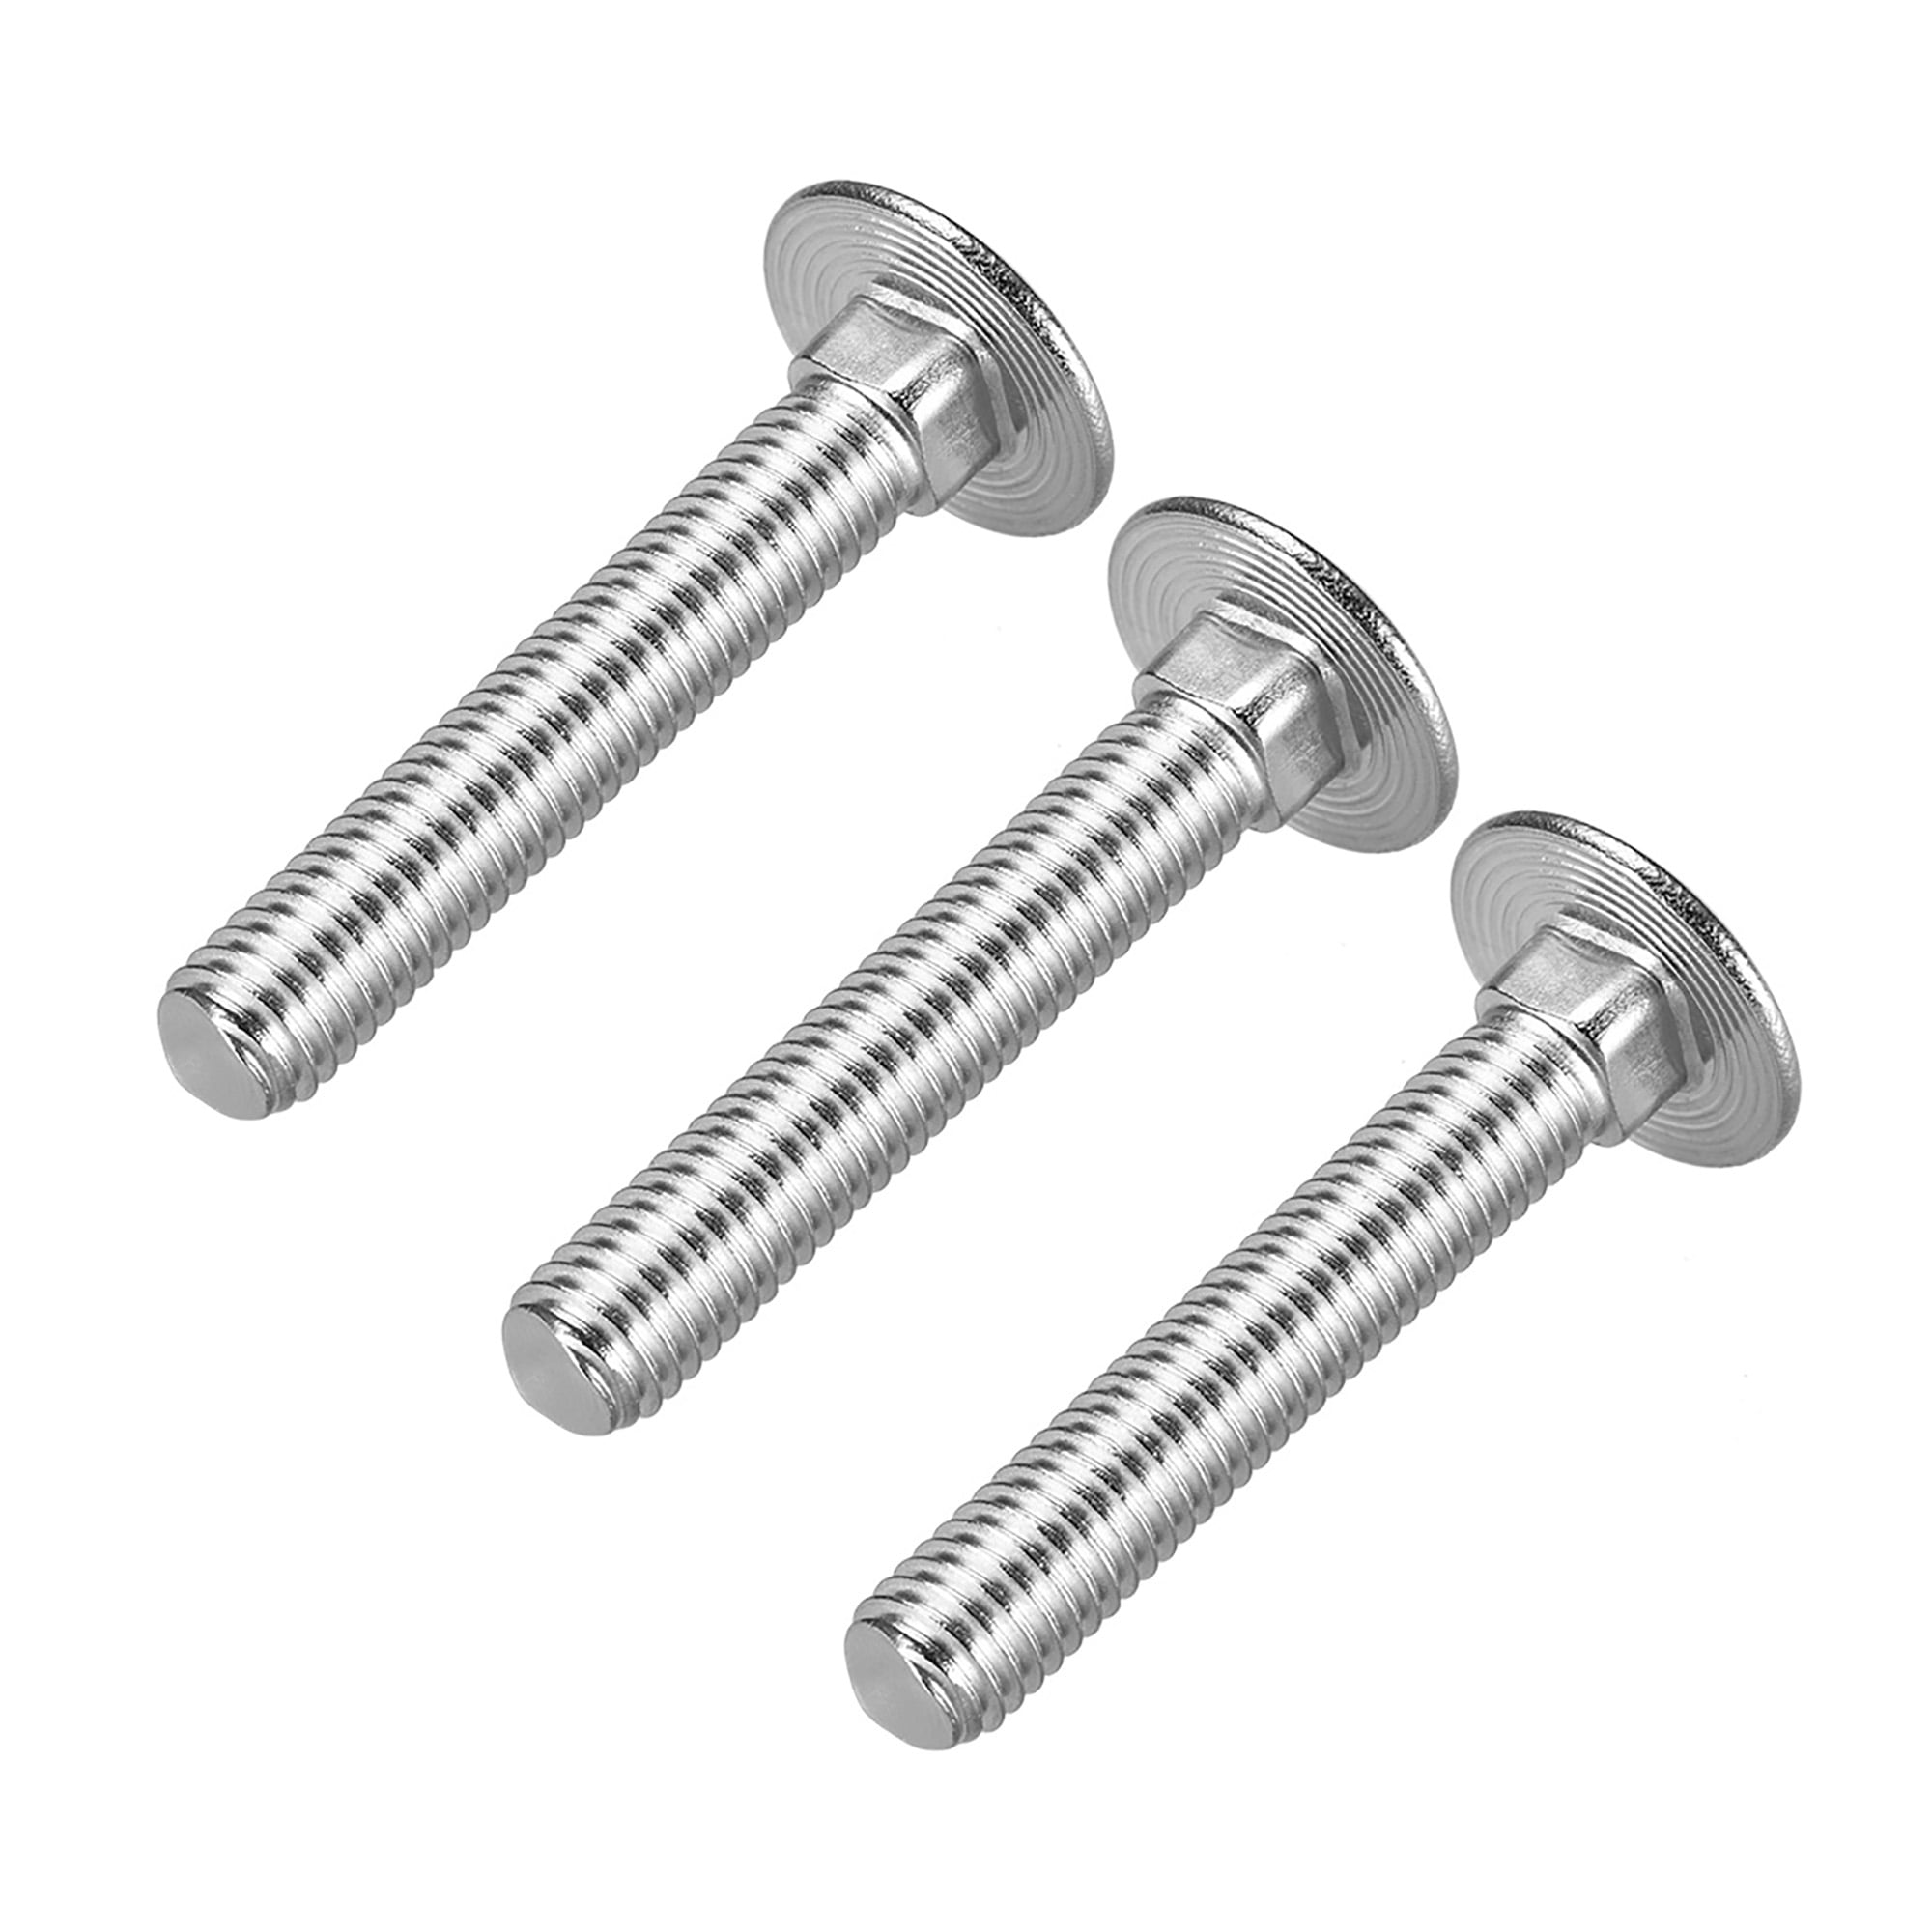 Type: M6x20mm-10pcs BOL-69014 Carriage Bolts Neck Carriage Bolt Round Head Square Neck 304 Stainless Steel M6x20mm 10pcs-